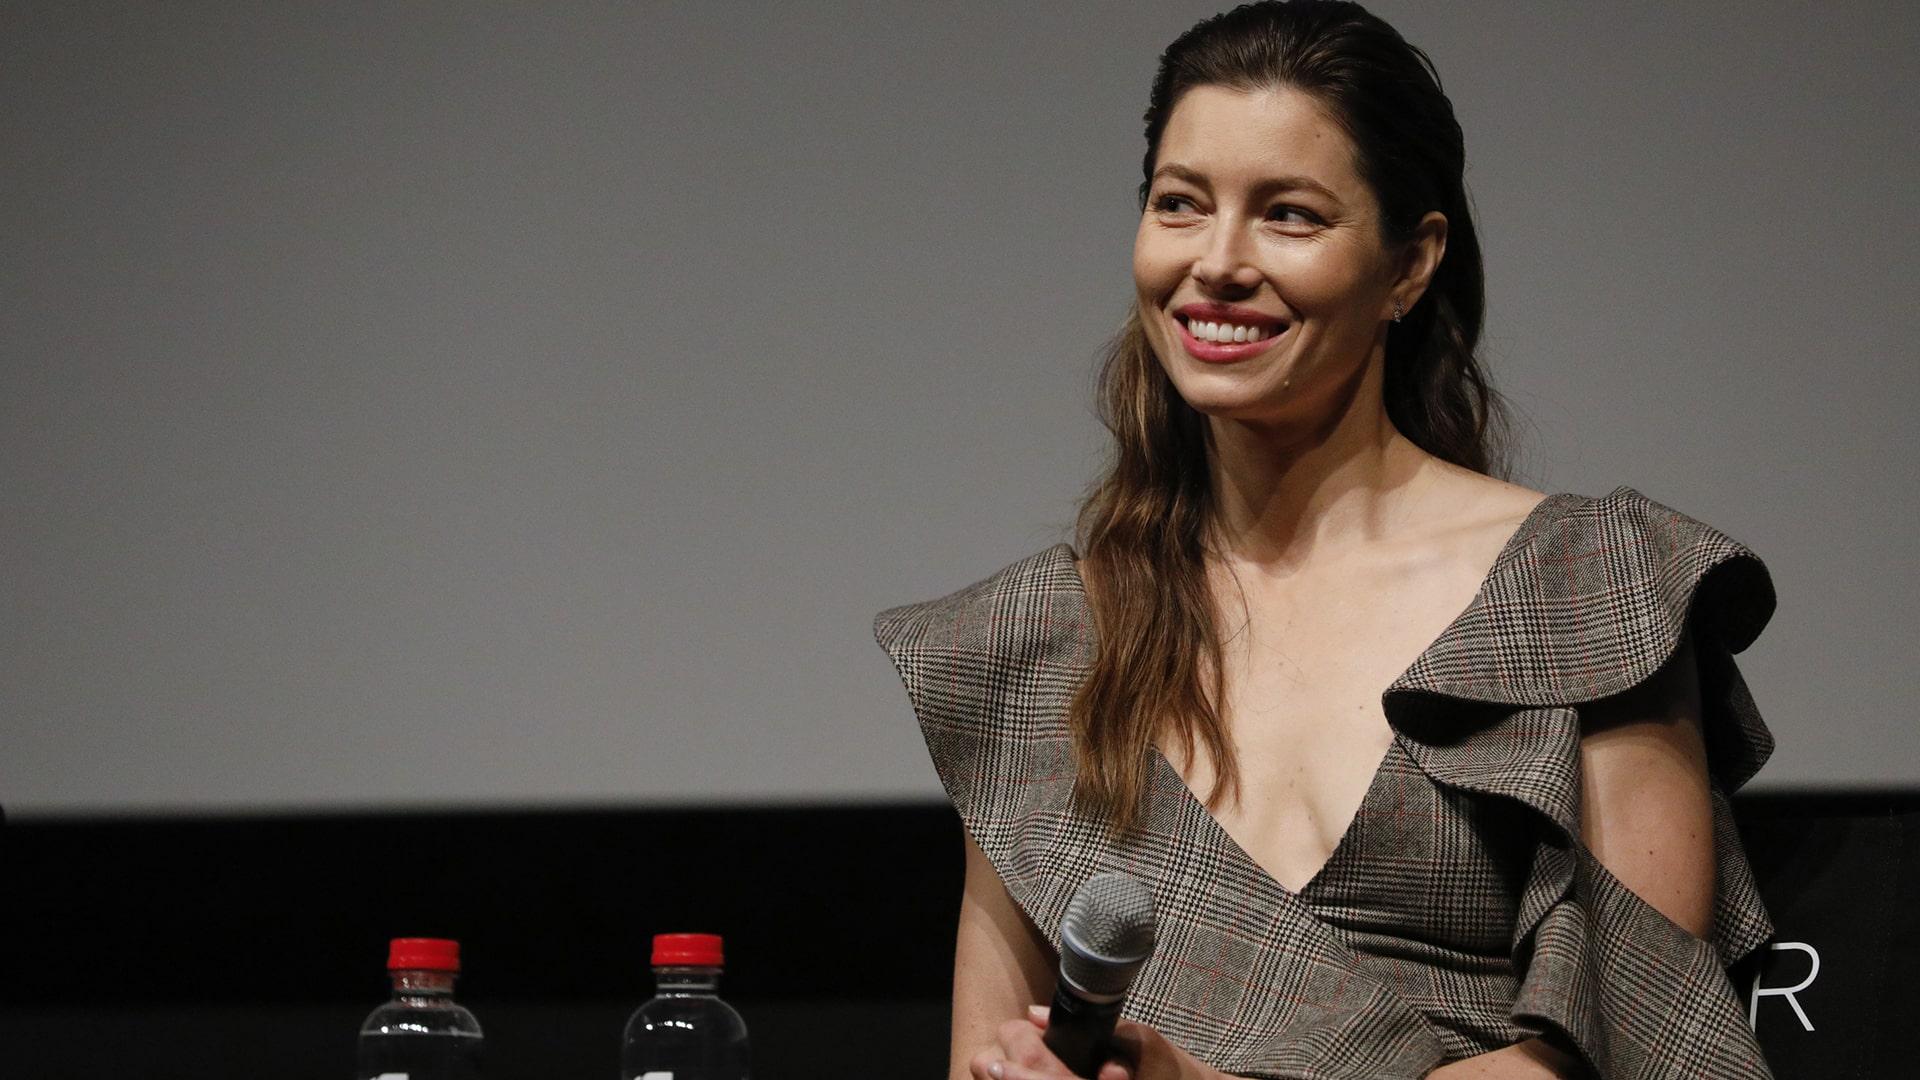 75+ Hot Pictures Of Jessica Biel Explore Her Extremely Sexy Body | Best Of Comic Books